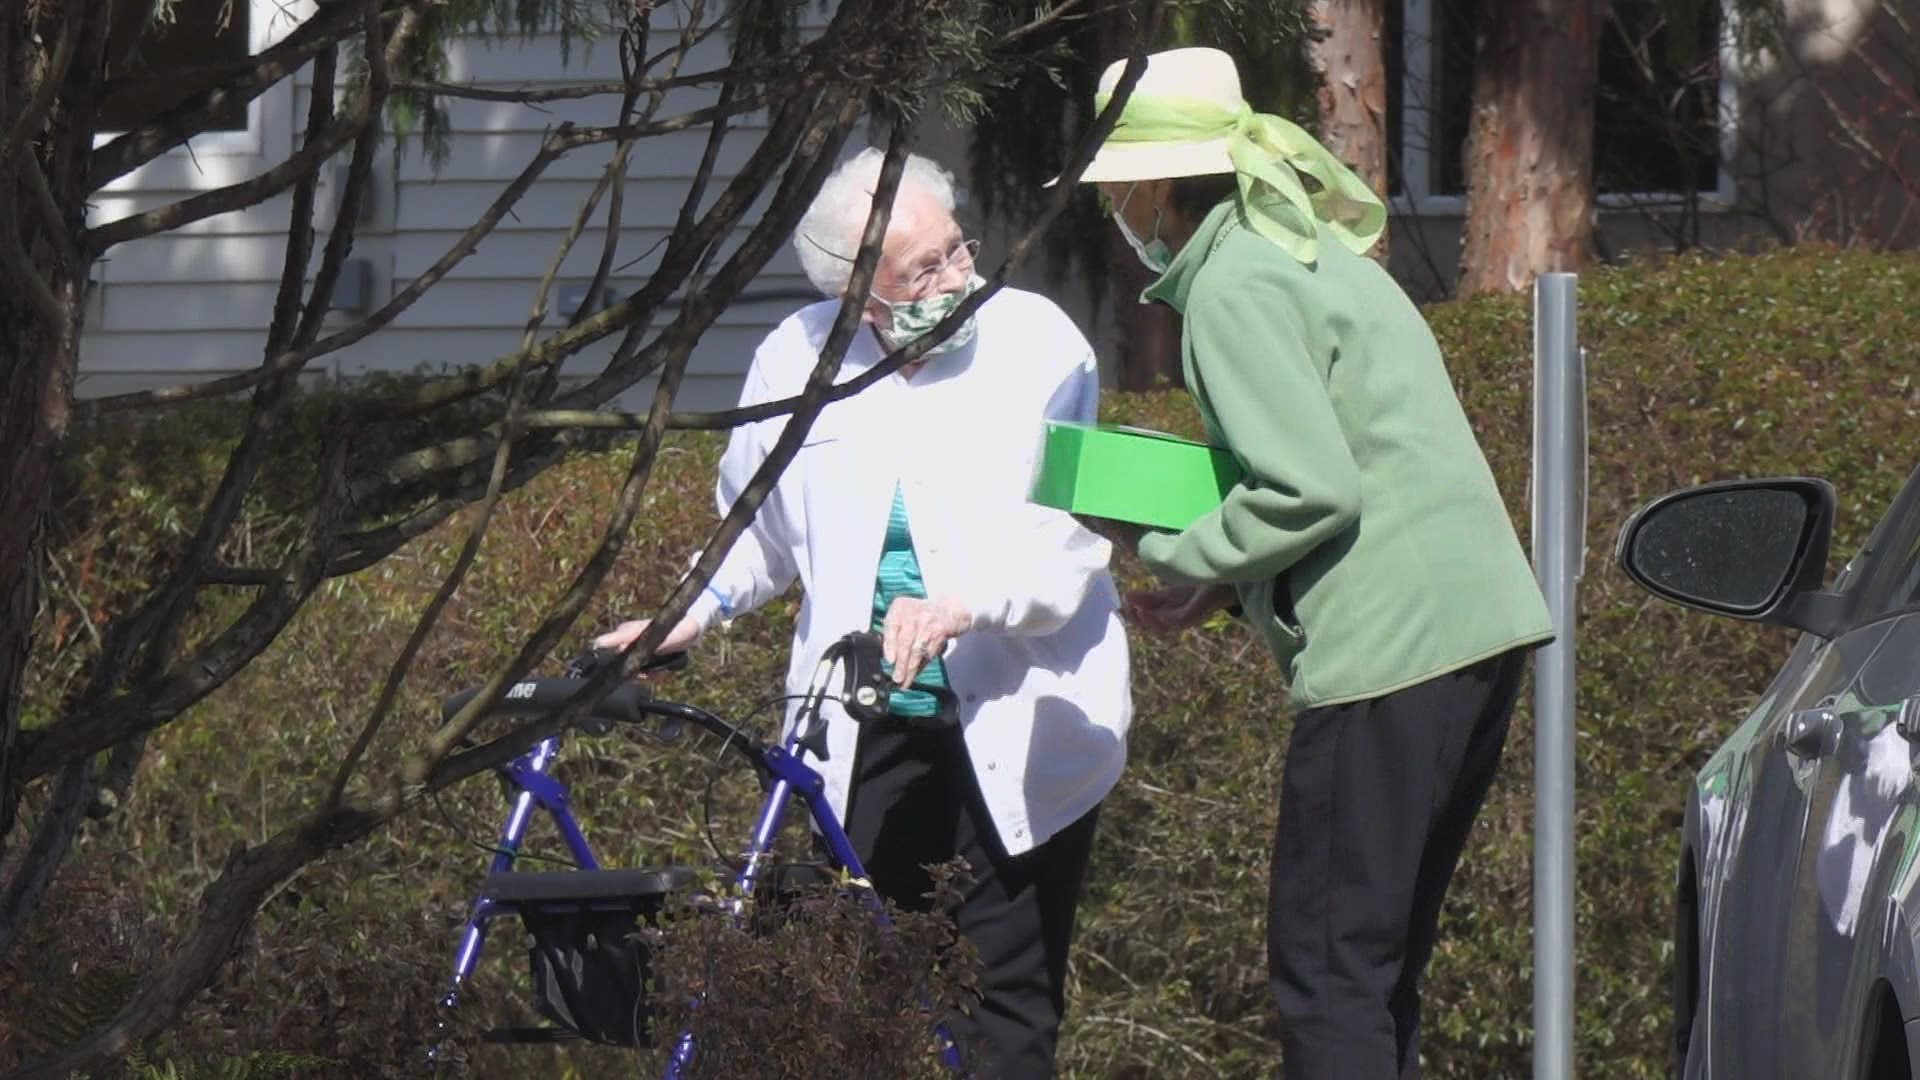 KING 5’s Chris Cashman was lucky enough to join the special St. Patrick's Day giveaway with the Lakeshore Retirement community.